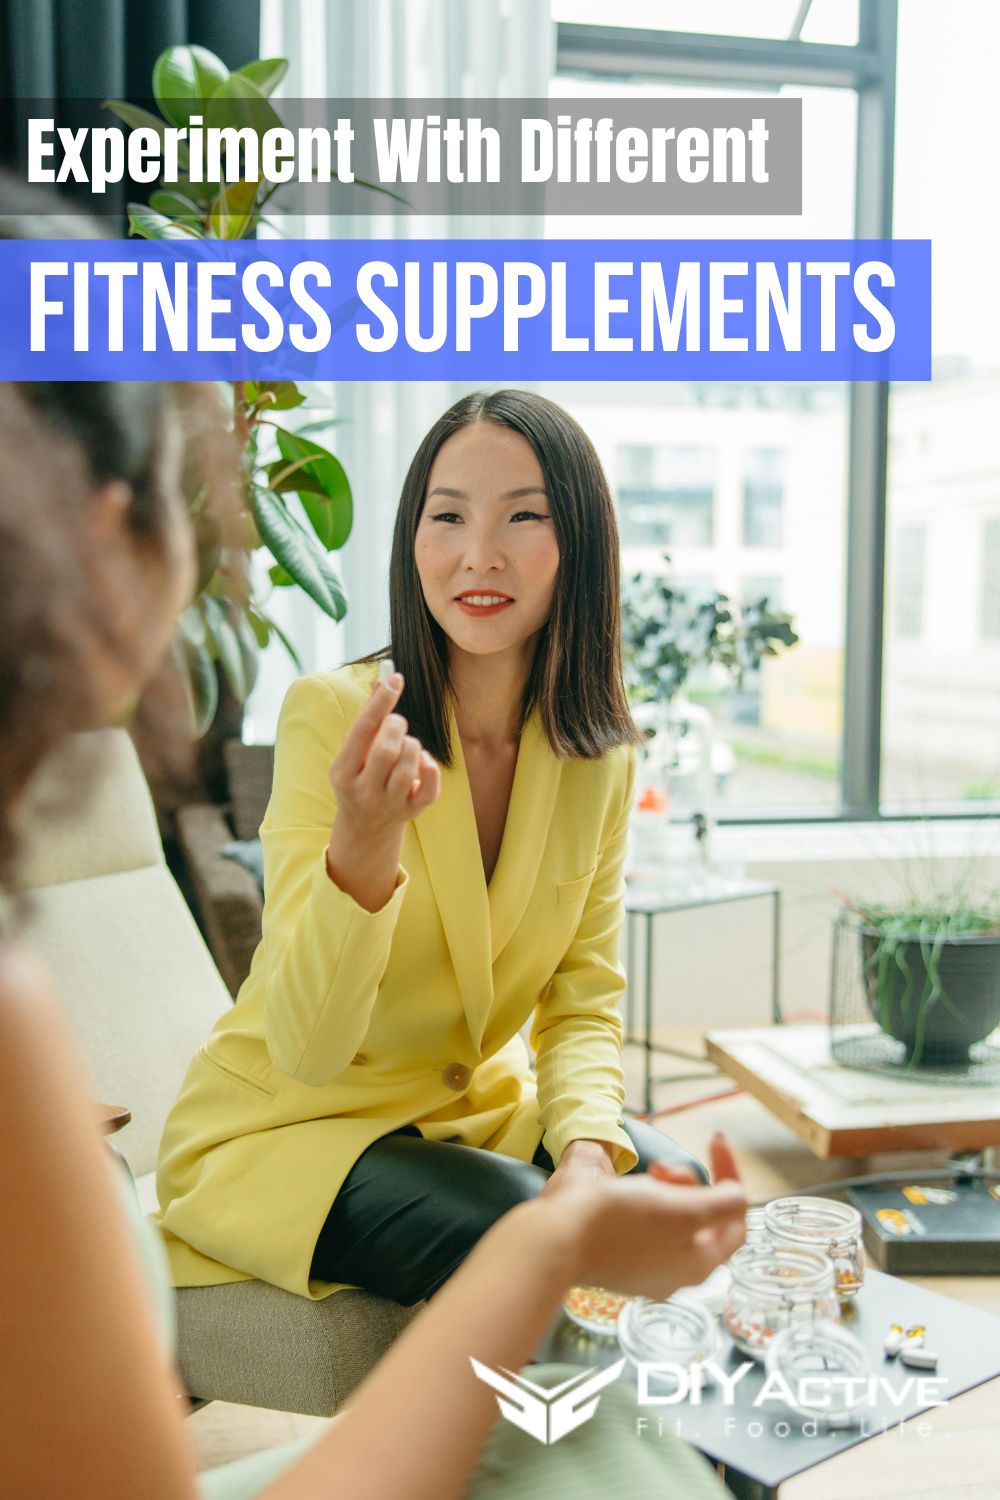 How Can Fitness Enthusiasts Experiment With Different Supplements 2